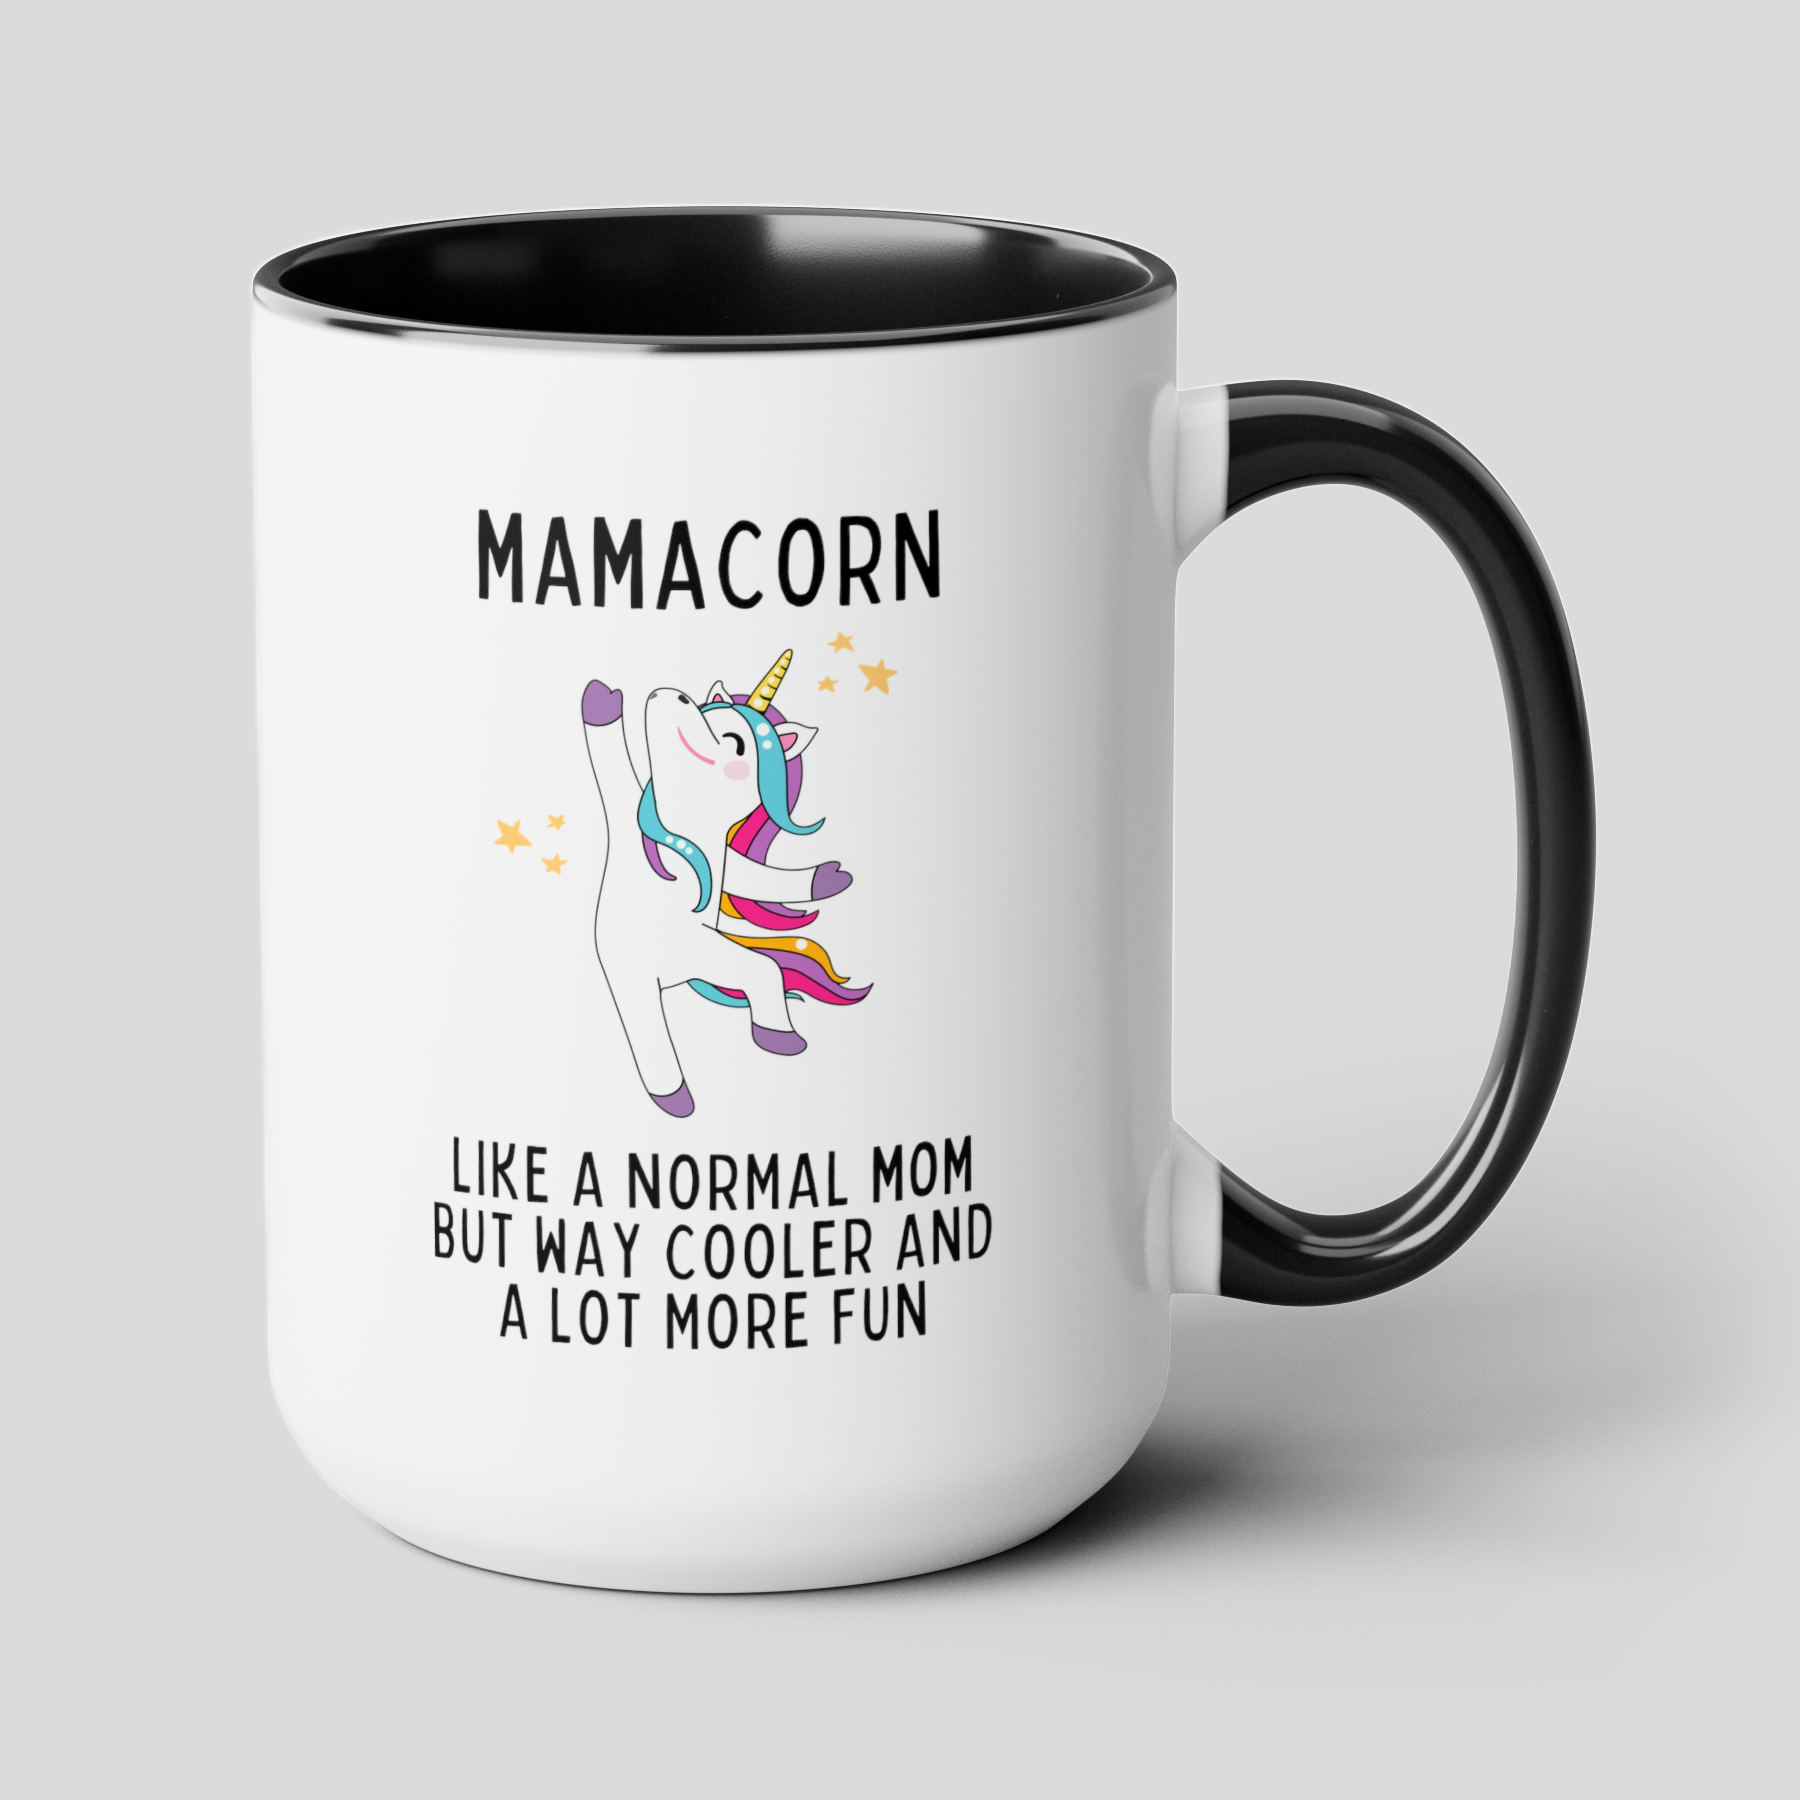 Mamacorn Like A Normal Mom But Way Cooler And A Lot More Fun 15oz white with a black accent funny large coffee mug gift for mom unicorn lover awesome mothers day waveywares wavey wares wavywares wavy wares cover